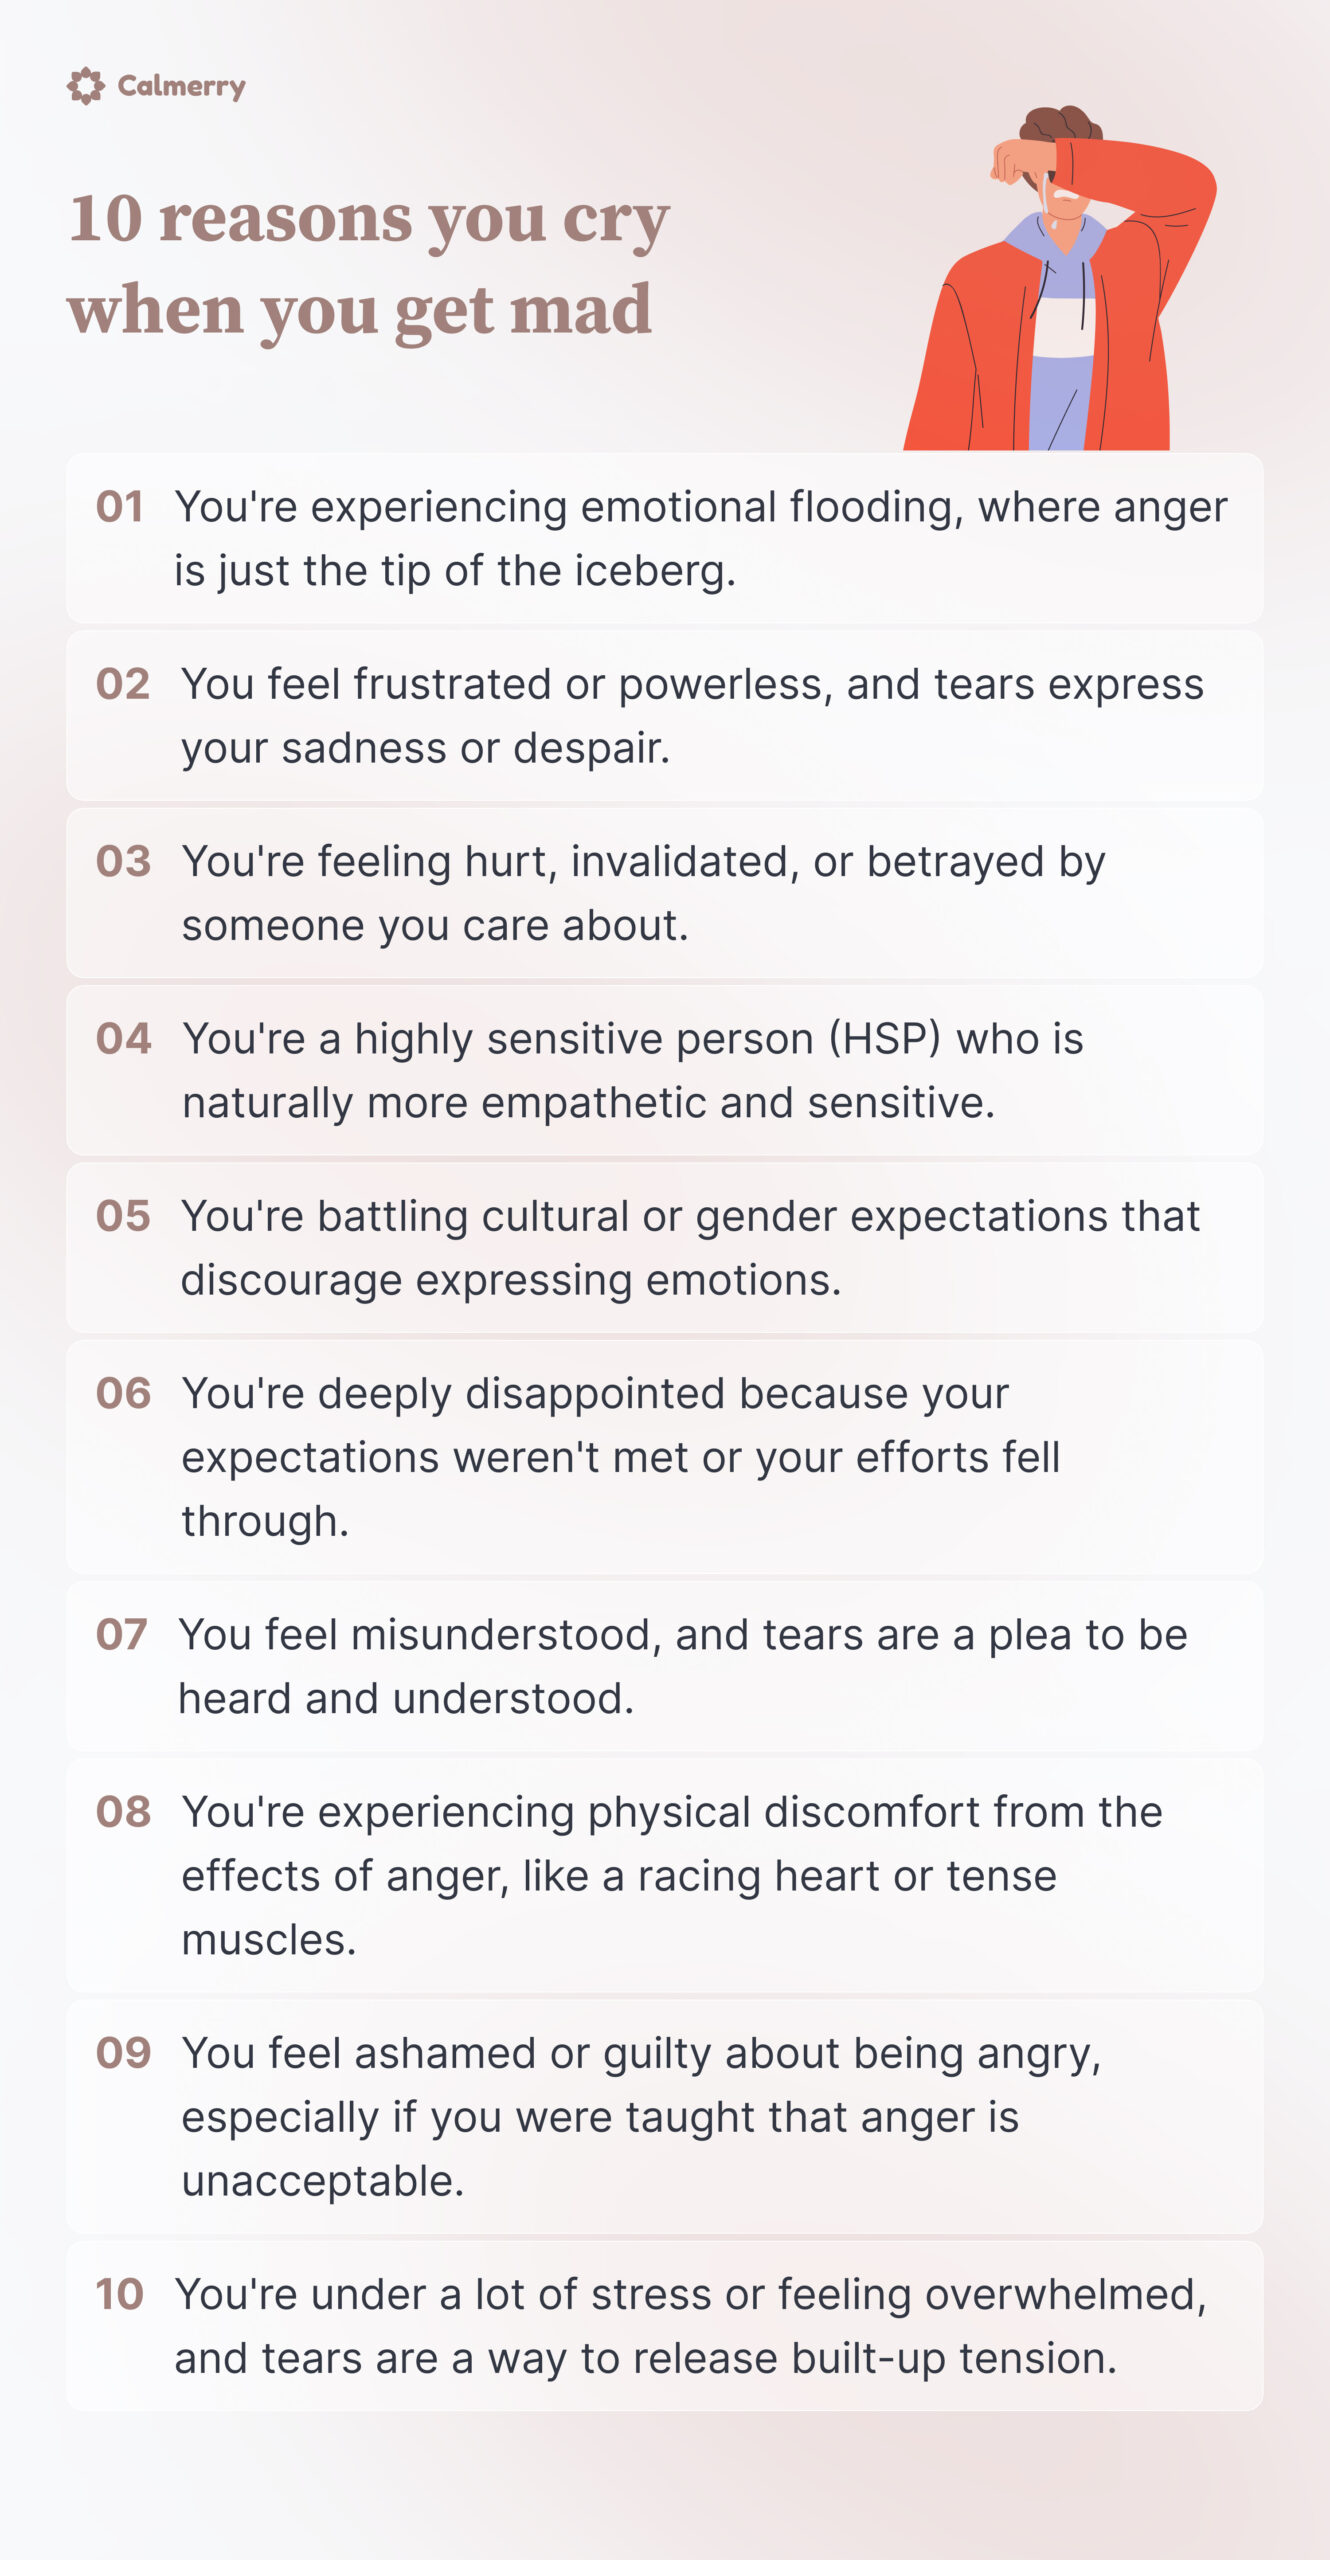 10 reasons you cry when you’re angry
You're experiencing emotional flooding, where anger is just the tip of the iceberg.
You feel frustrated or powerless, and tears express your sadness or despair.
You're feeling hurt, invalidated, or betrayed by someone you care about.
You're a highly sensitive person (HSP) who is naturally more empathetic and sensitive.
You're battling cultural or gender expectations that discourage expressing emotions.
You're deeply disappointed because your expectations weren't met or your efforts fell through.
You feel misunderstood, and tears are a plea to be heard and understood.
You're experiencing physical discomfort from the effects of anger, like a racing heart or tense muscles.
You feel ashamed or guilty about being angry, especially if you were taught that anger is unacceptable.
You're under a lot of stress or feeling overwhelmed, and tears are a way to release built-up tension.
